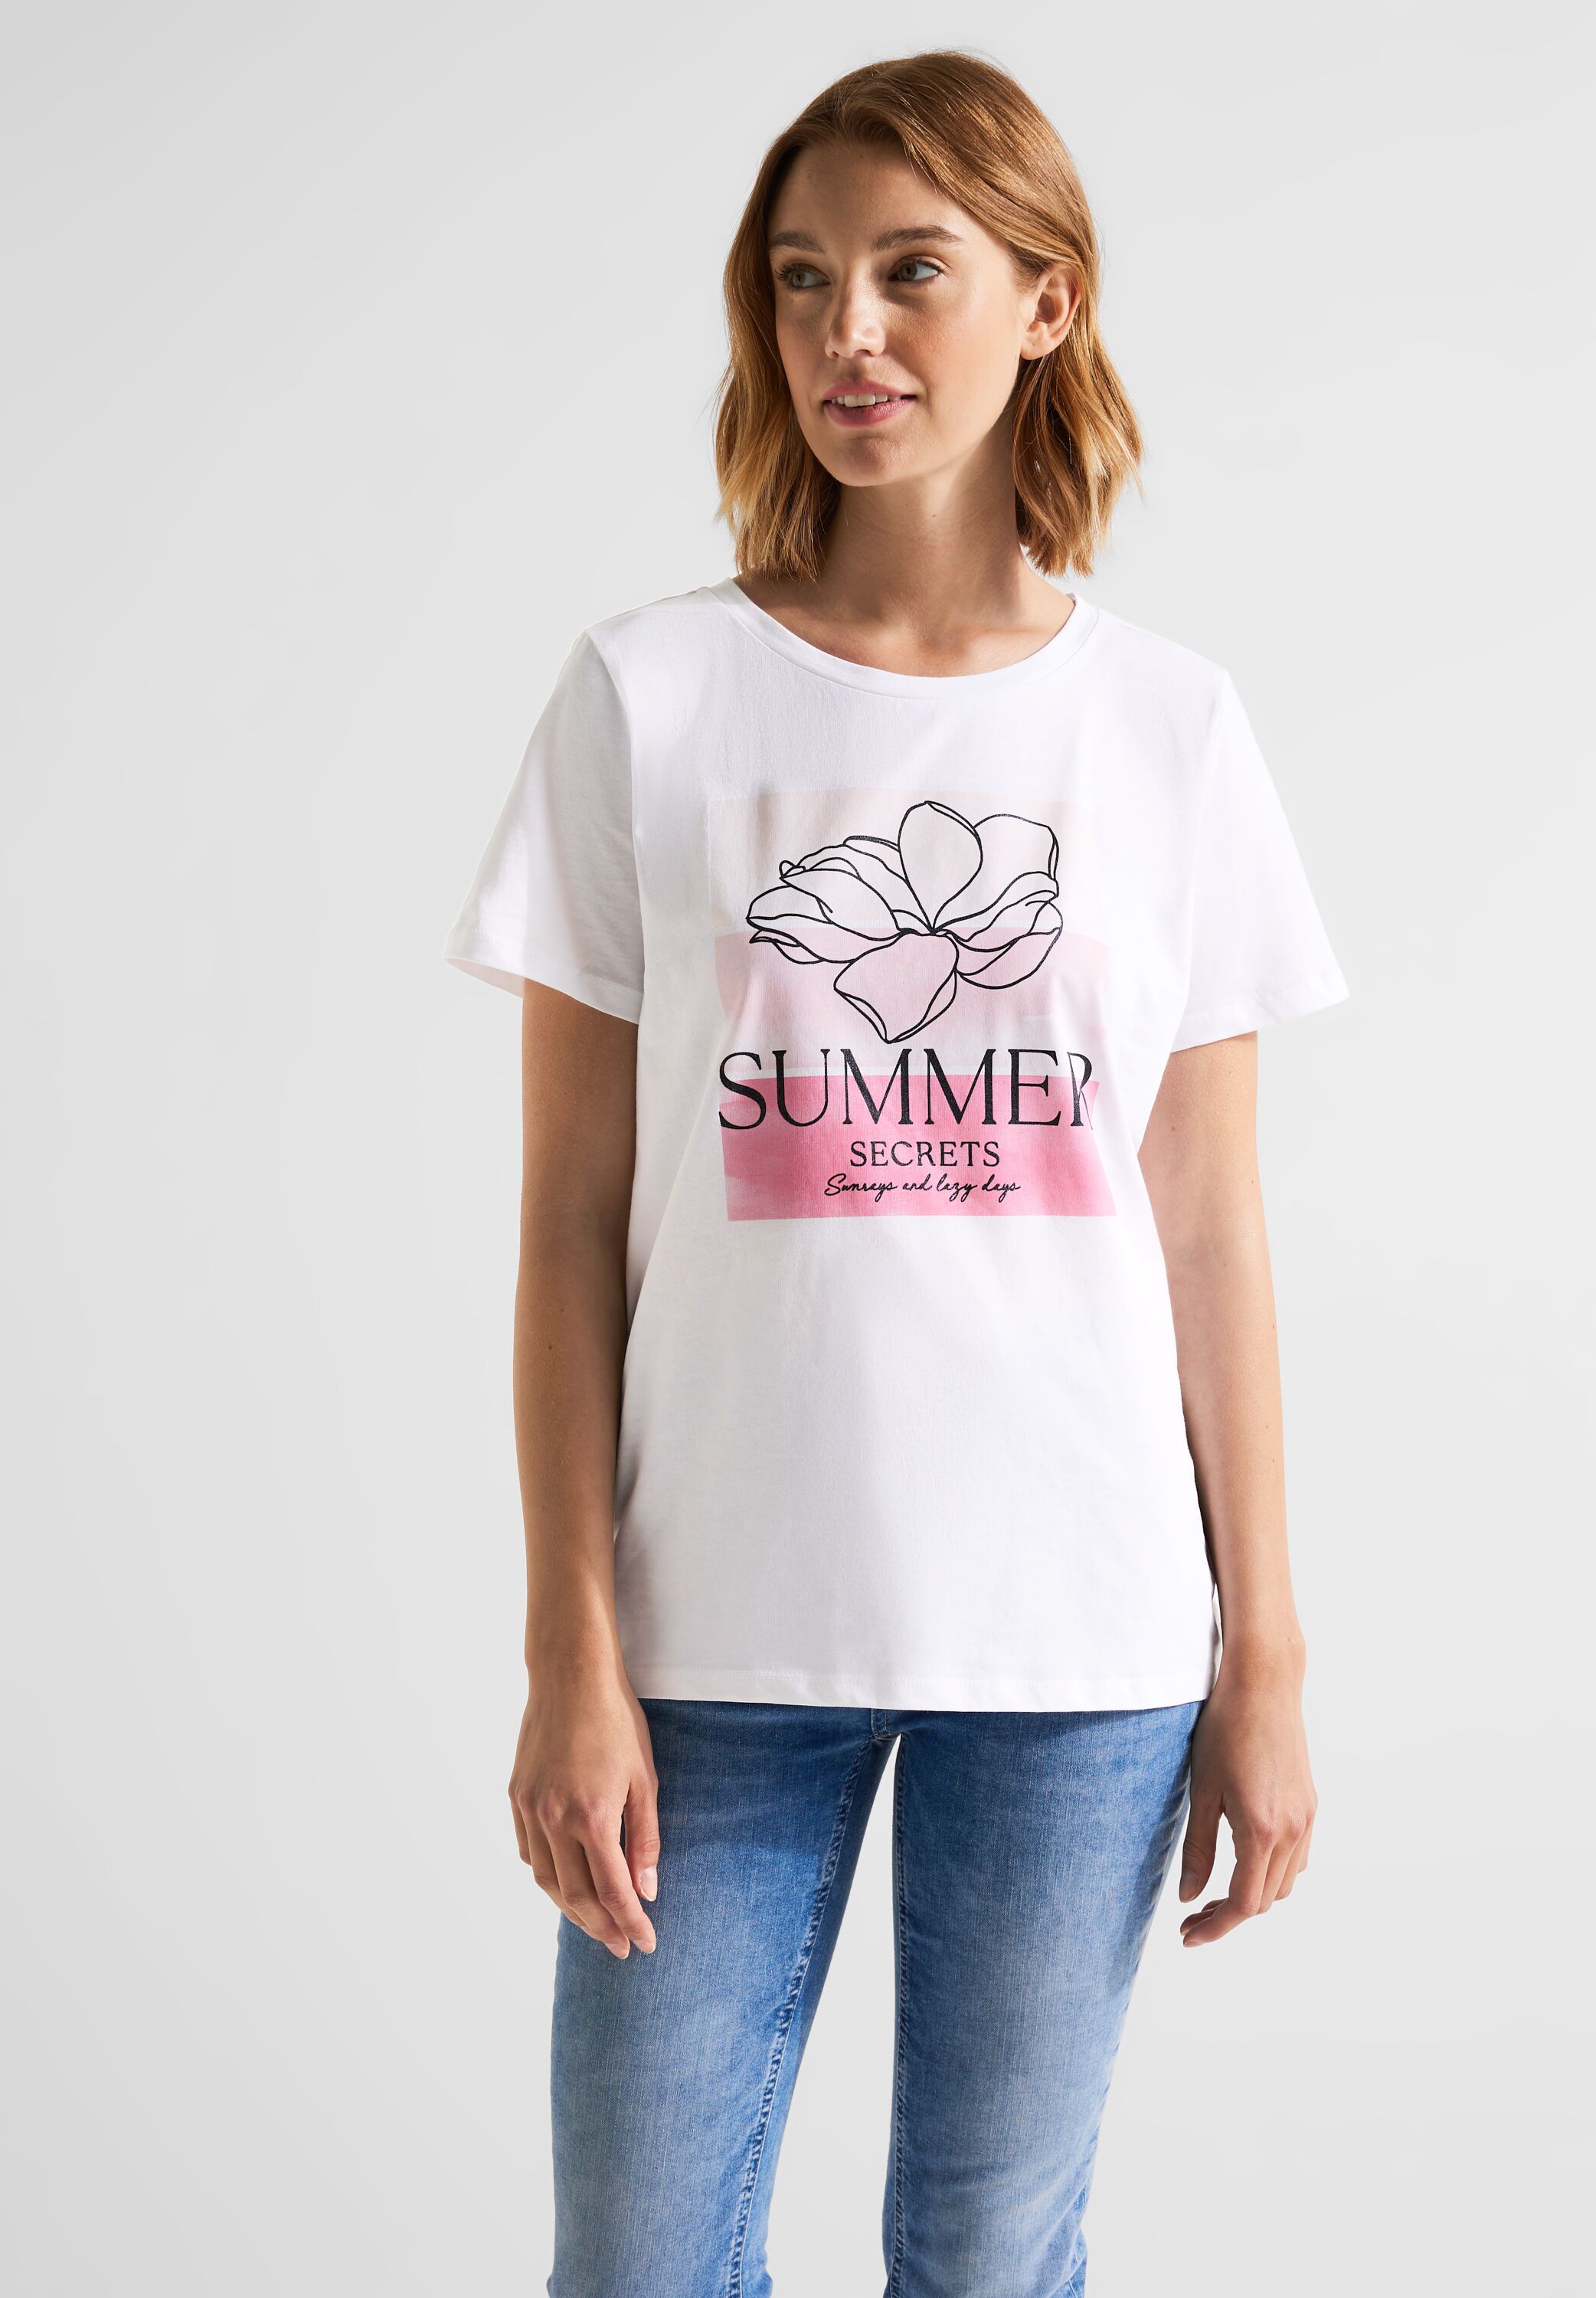 One CONCEPT Mode in A320181-34647 reduziert T-Shirt im Berry - Rose Street SALE